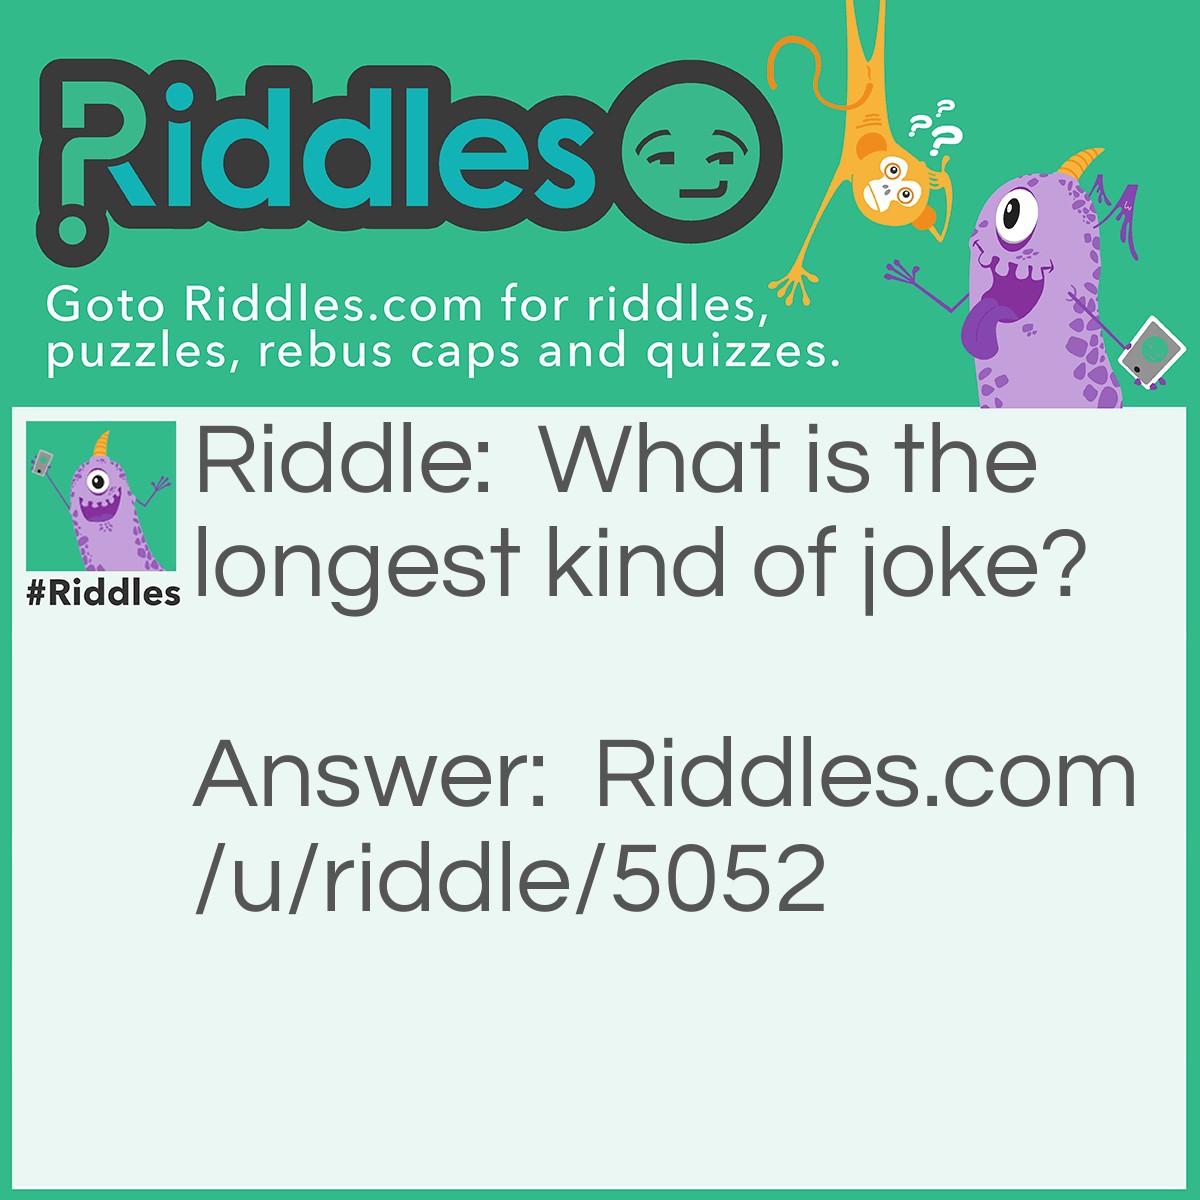 Riddle: What is the longest kind of joke? Answer: A jjjjjjjjjjjjjooooooookkkkkkkkkkkkkkkkkkeeeeeeeeeeeeeee!